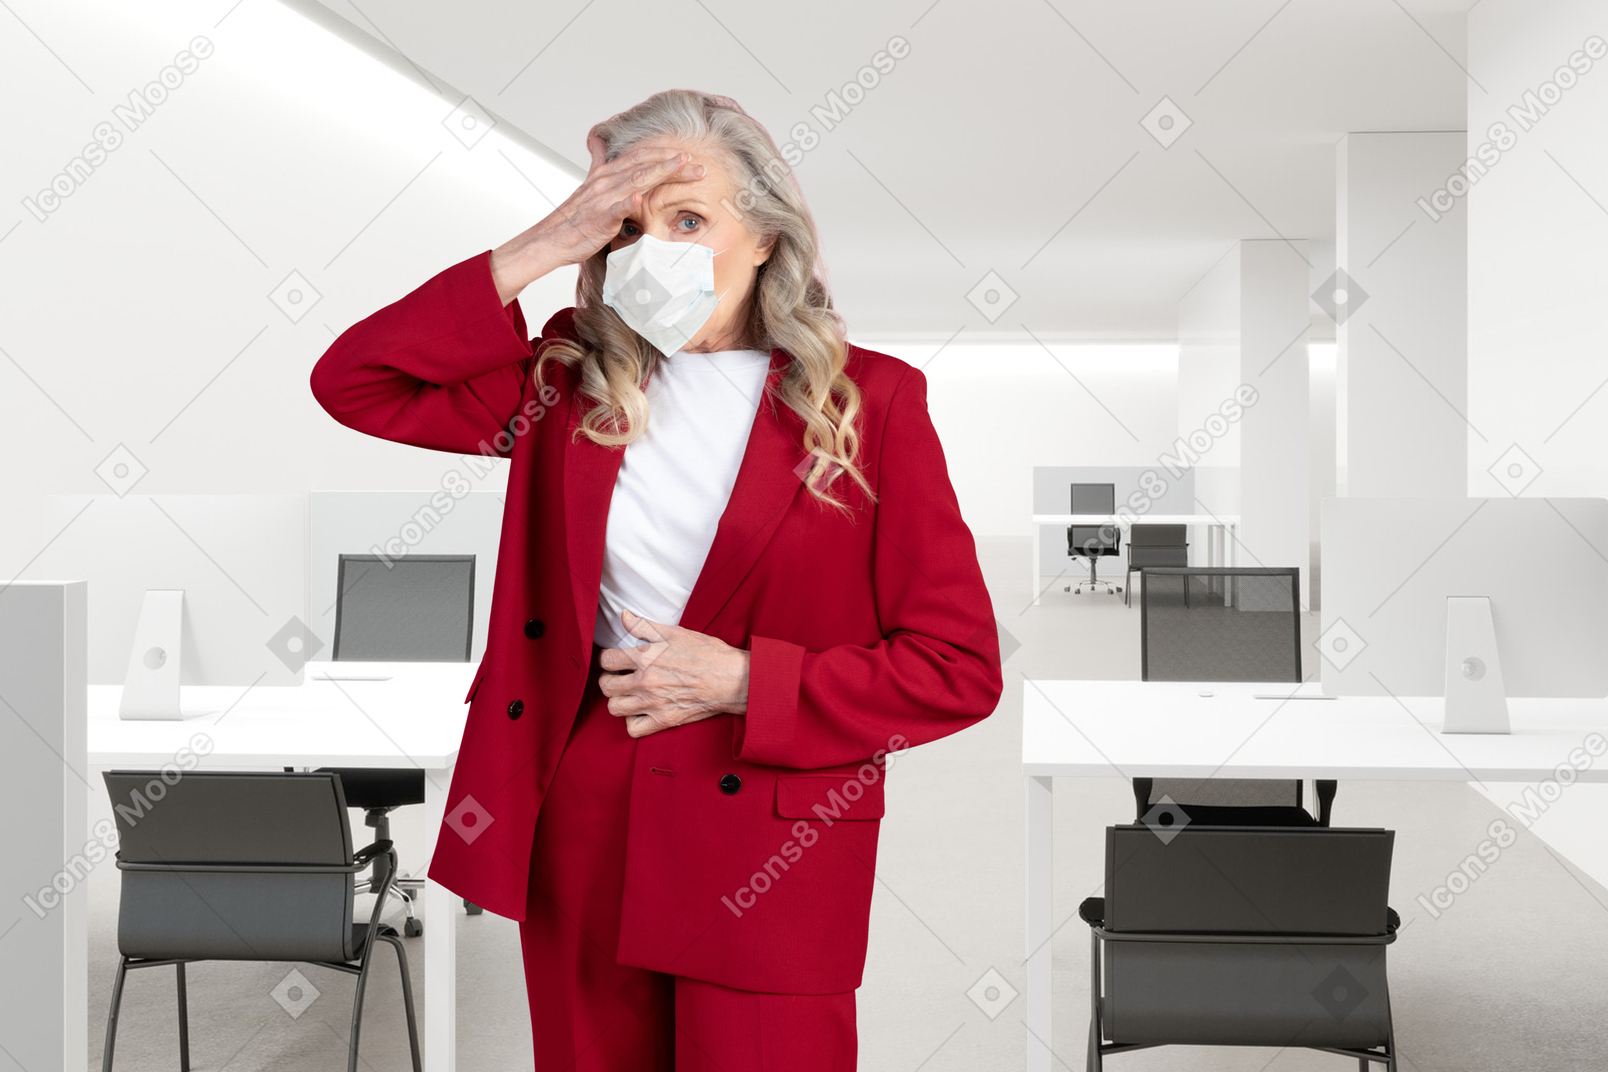 Elderly woman in face mask standing in the office and touching her forehead